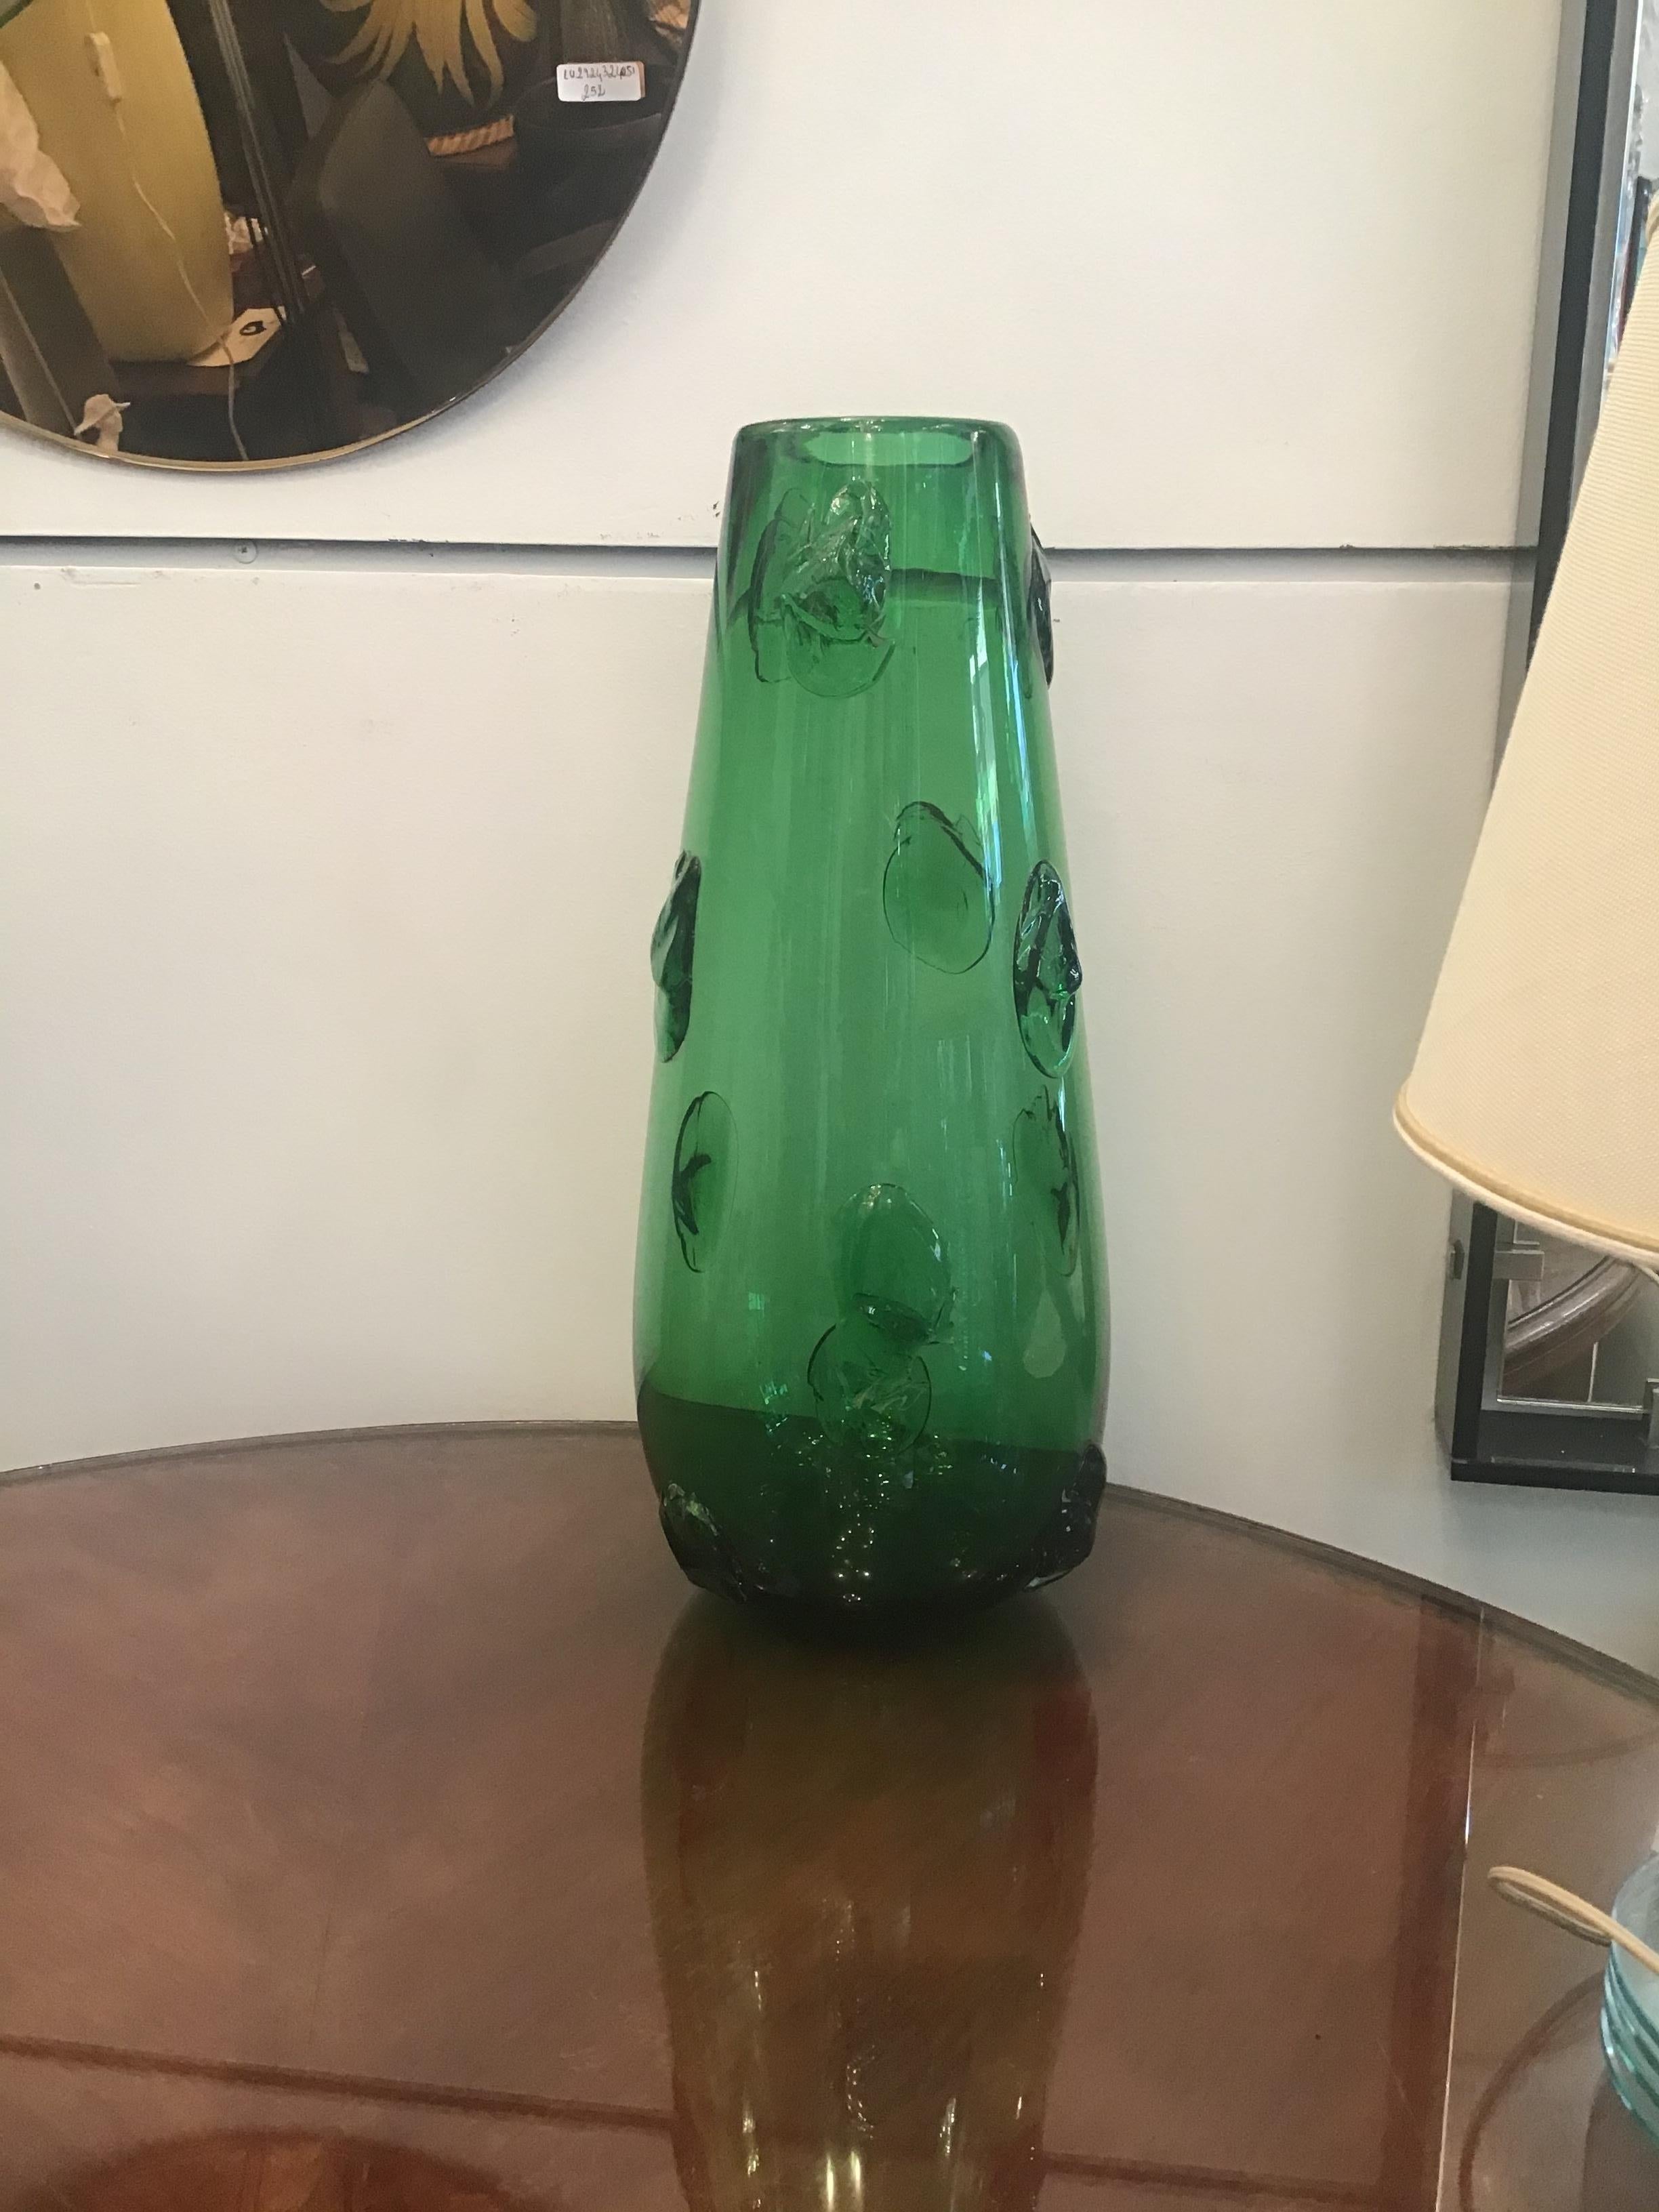 green glass vase made in italy